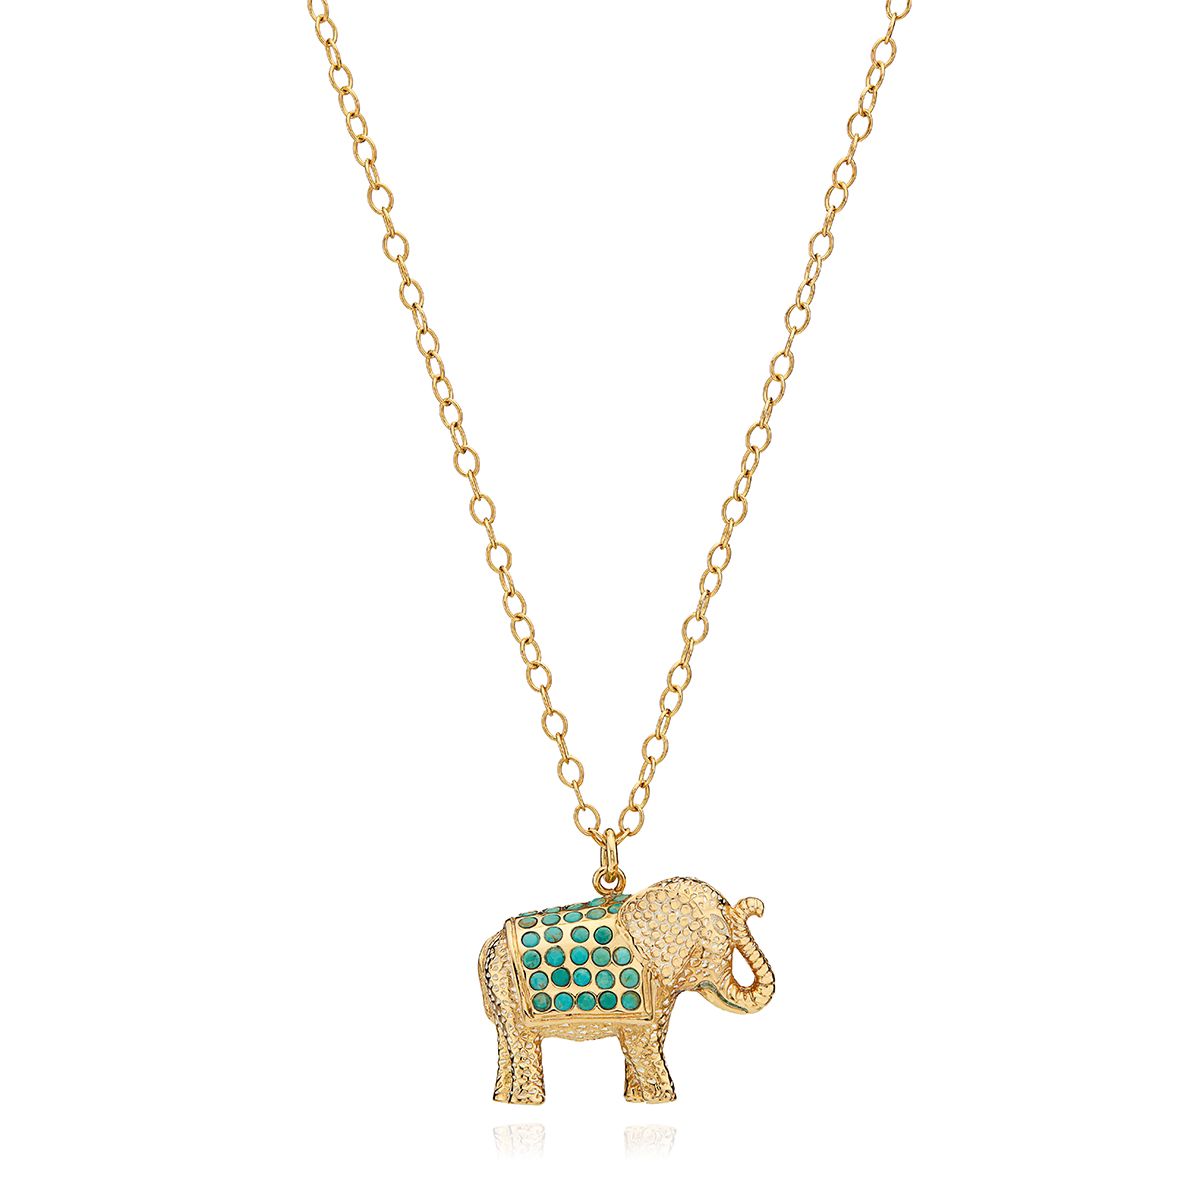 Gold elephant necklace with turquoise pave stones